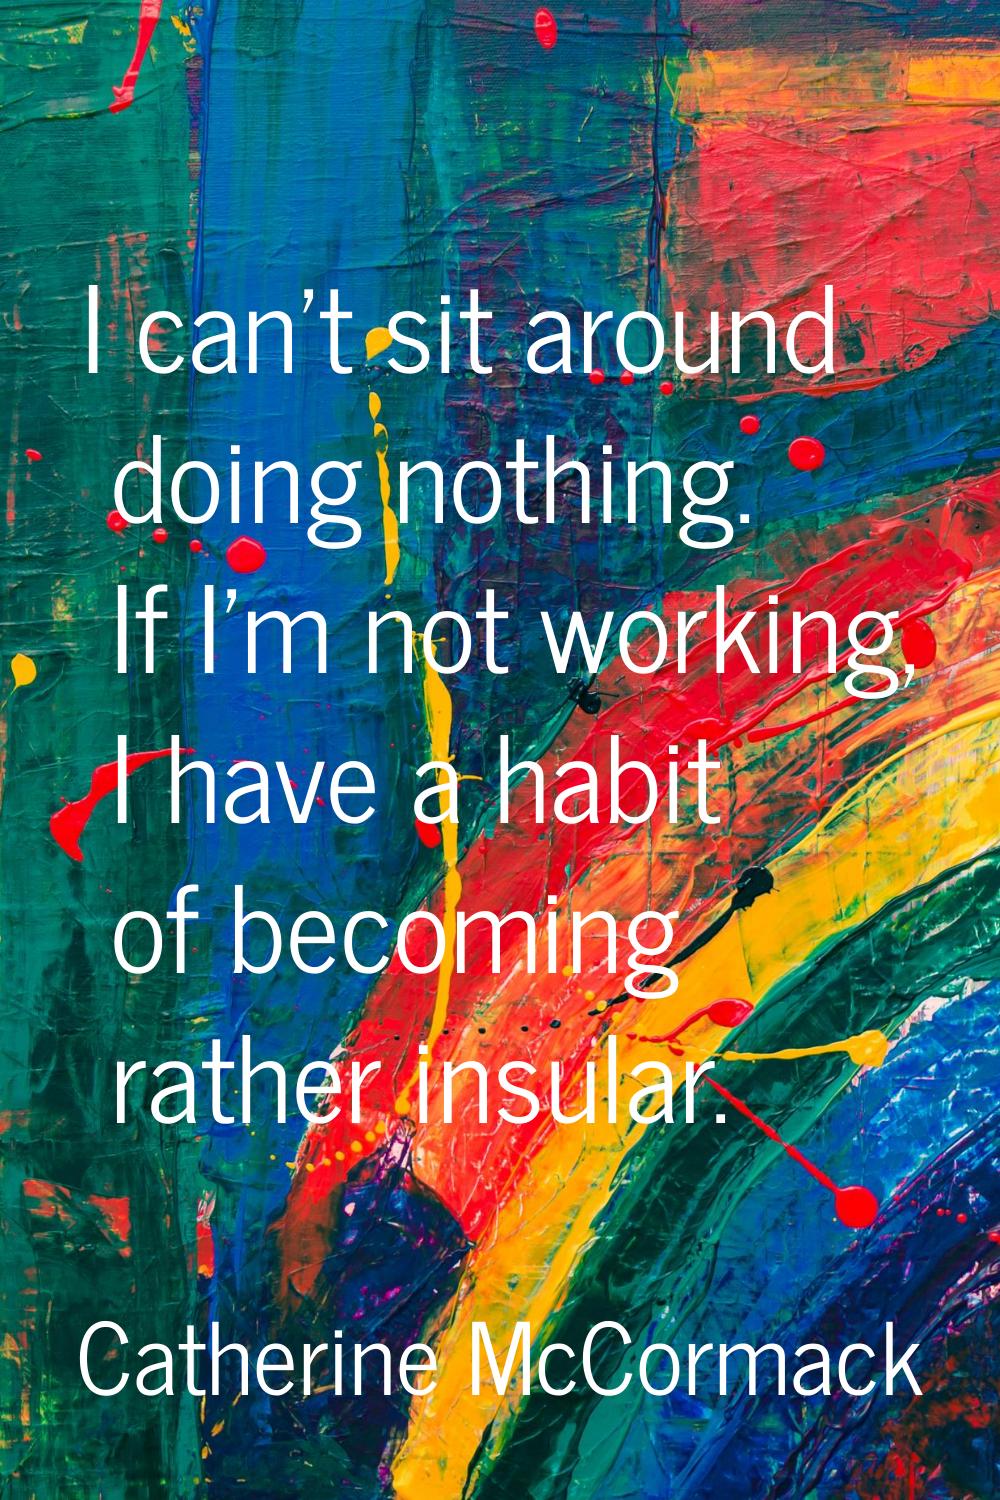 I can't sit around doing nothing. If I'm not working, I have a habit of becoming rather insular.